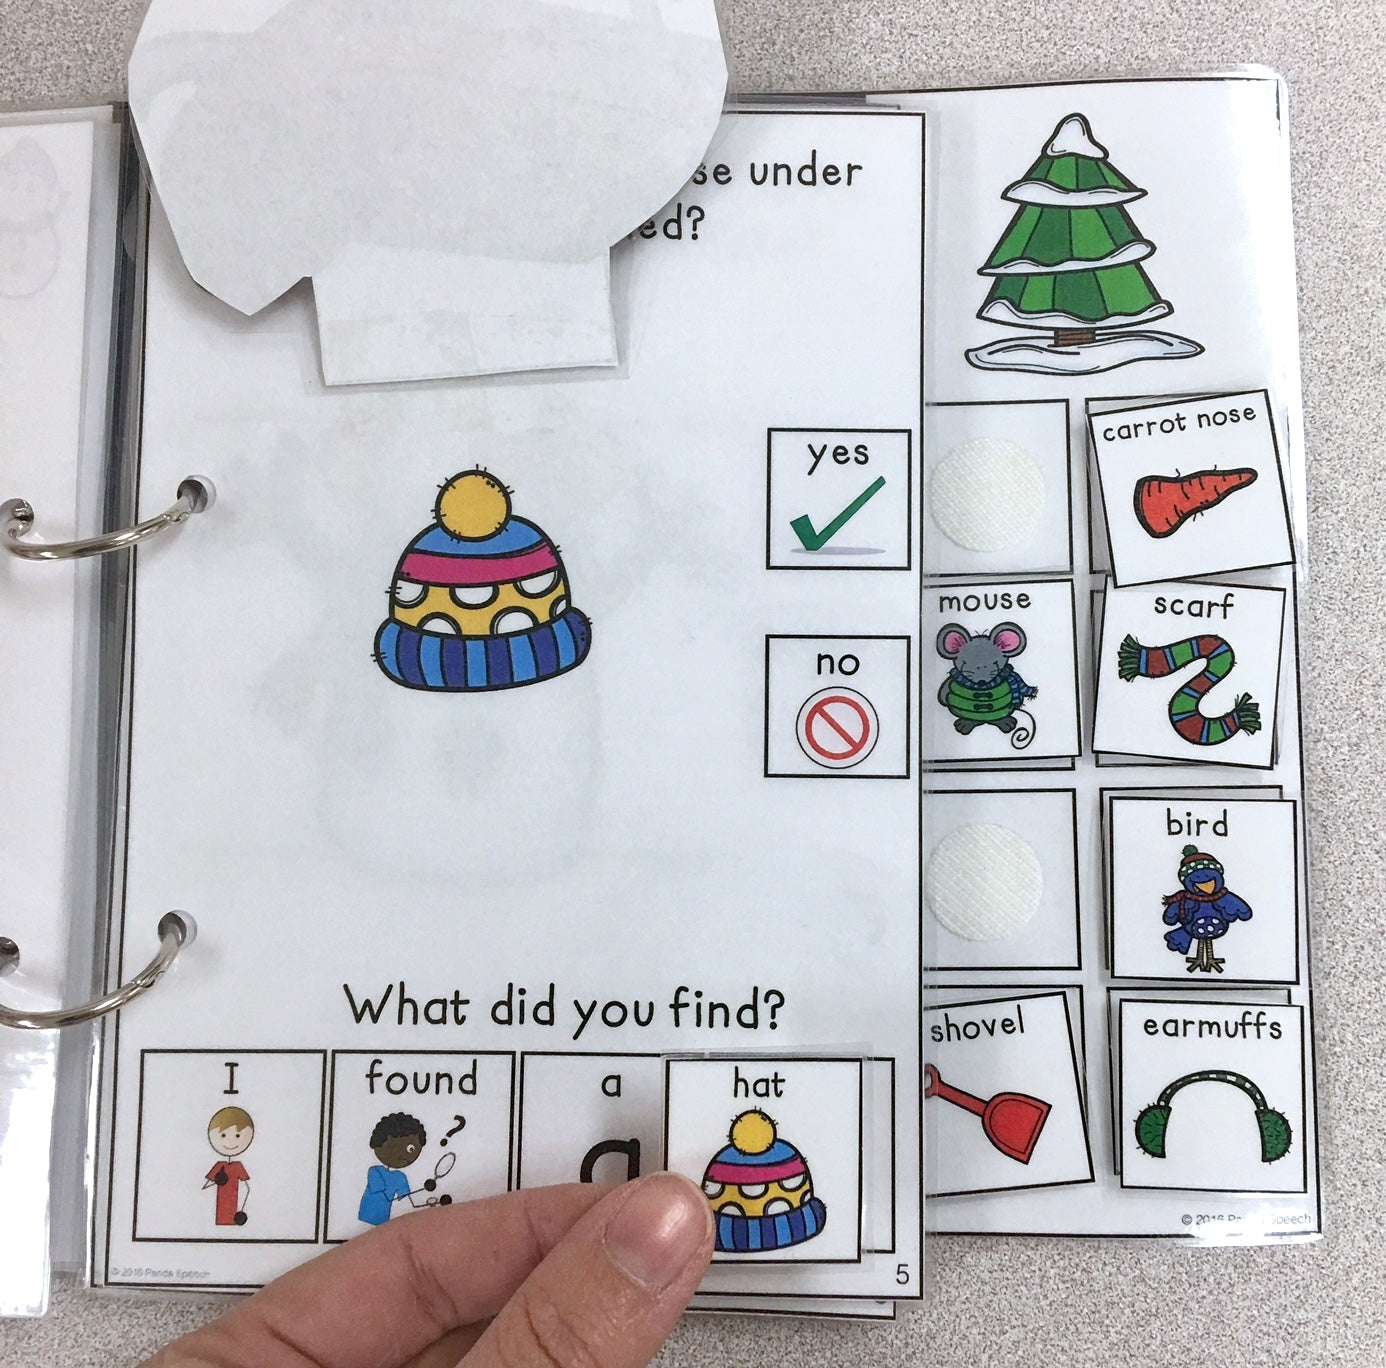 Mr. Frost Lost his Nose ! Lift a Flap Book  (Print & Make Book)